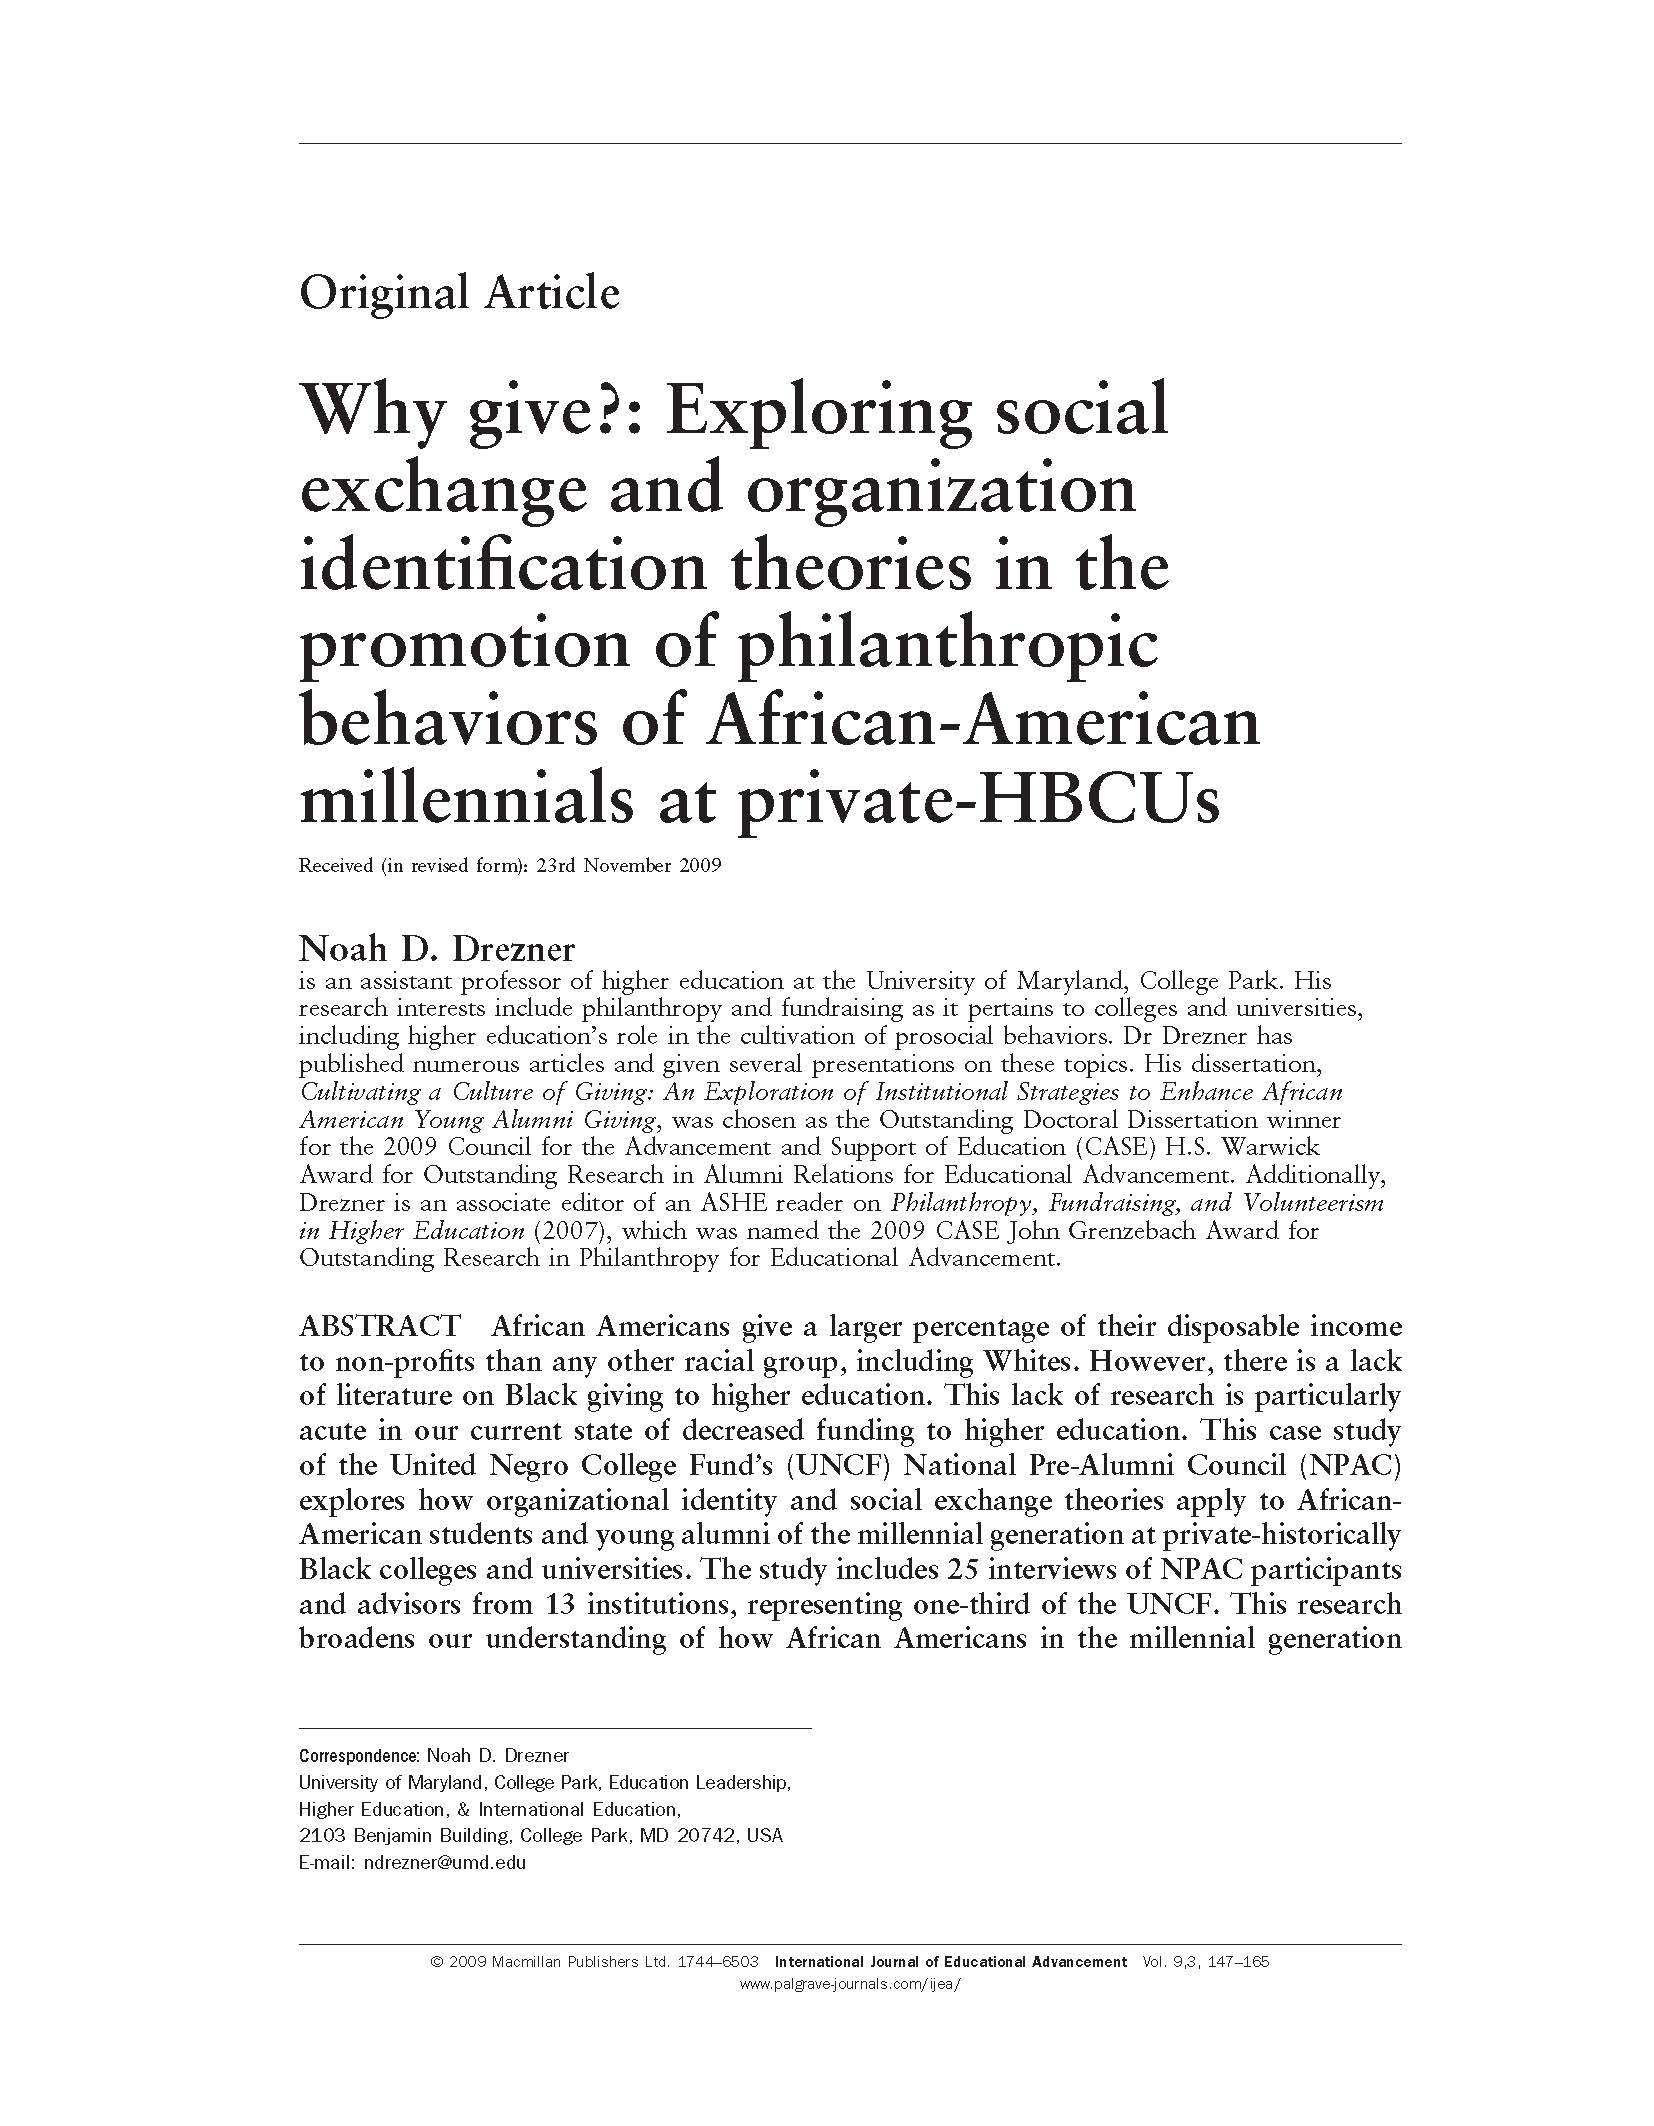 Why give?: Exploring social exchange and organizational identification theories in the promotion of philanthropic behaviors of African American millennials at private-HBCUs